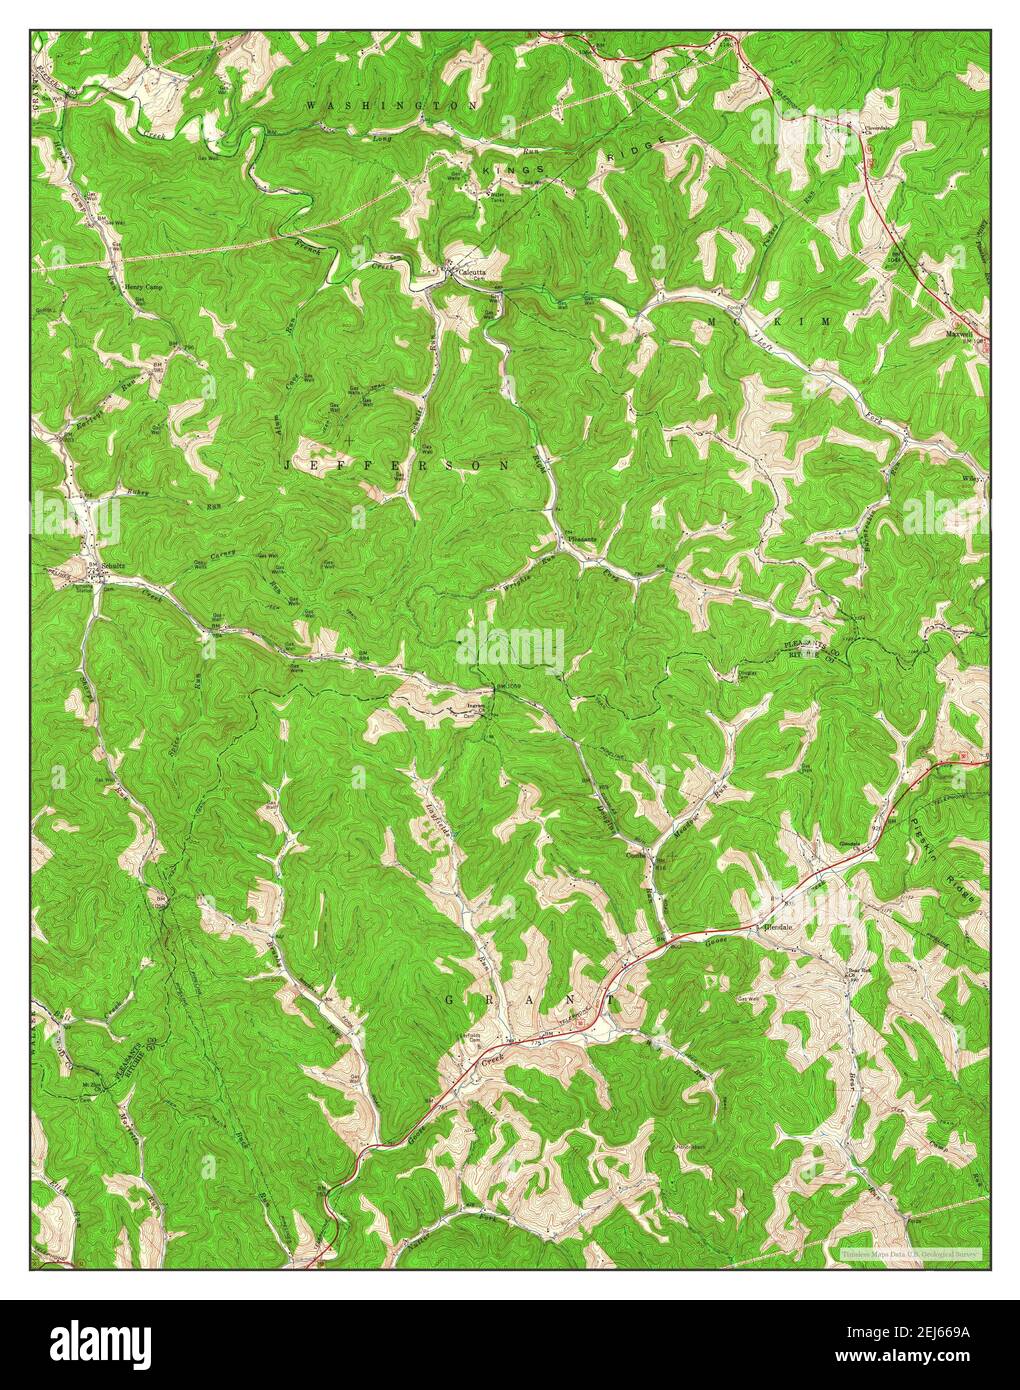 Schultz, West Virginia, map 1961, 1:24000, United States of America by Timeless Maps, data U.S. Geological Survey Stock Photo